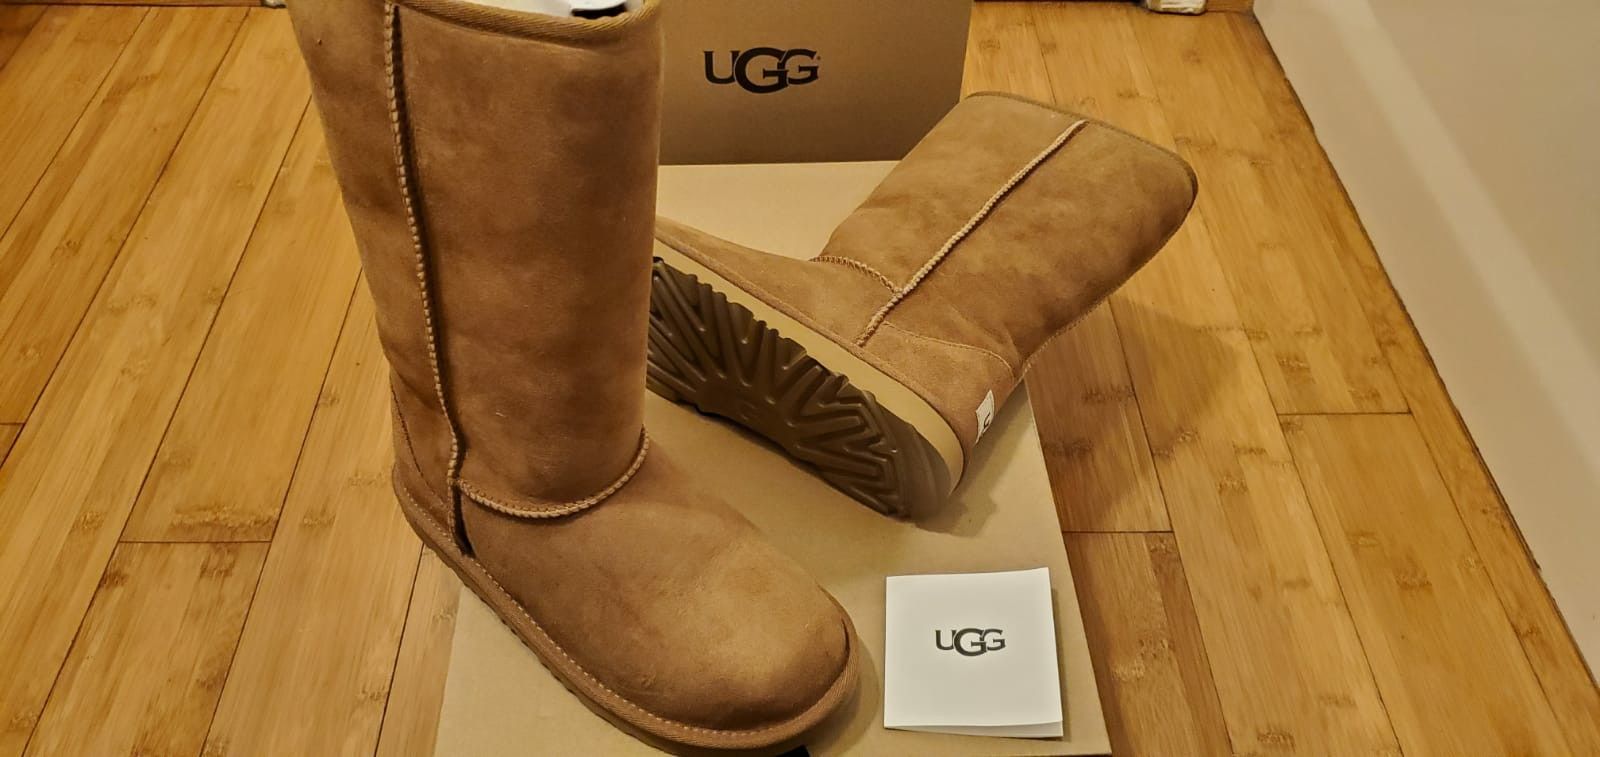 Classic Tall UGG boots size 6,7 and 8 in women.